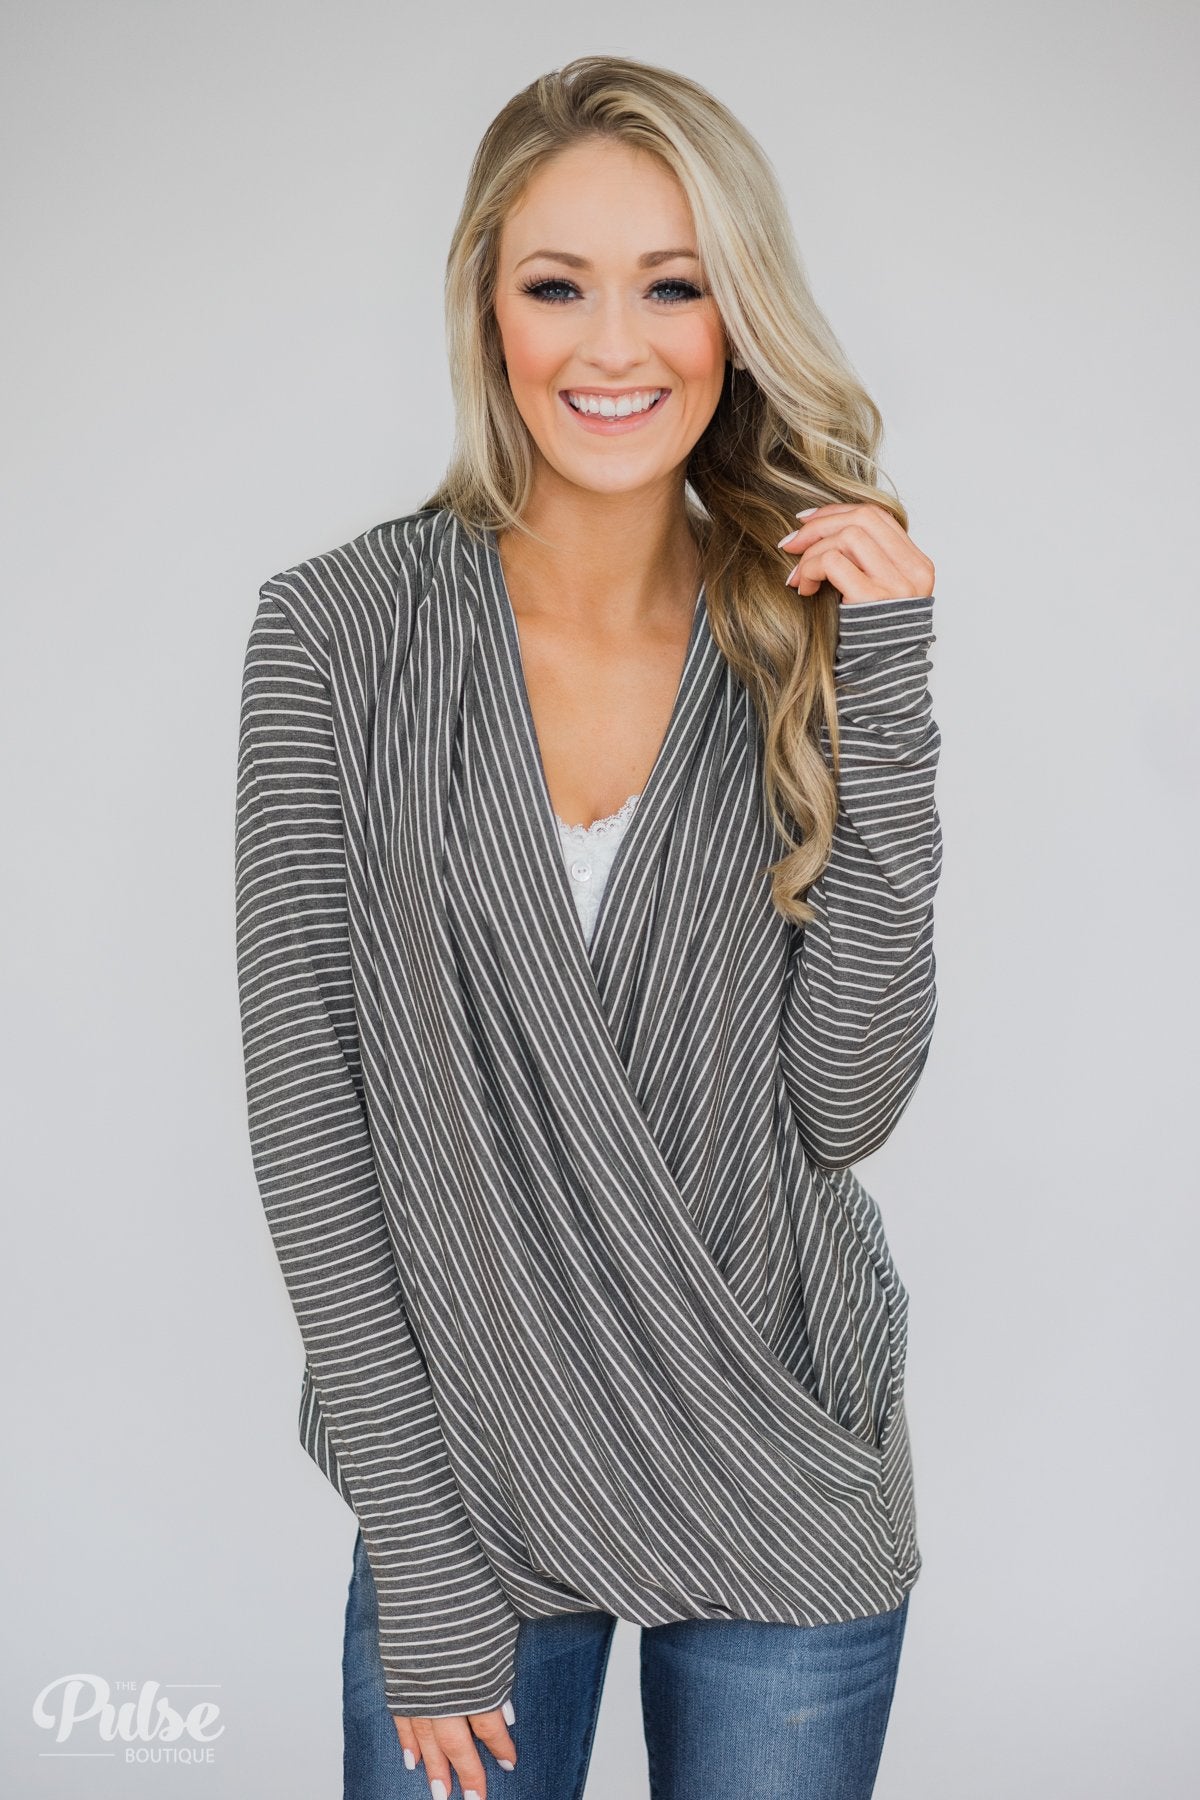 Wrap It Up Long Sleeve Striped Top- Charcoal Grey